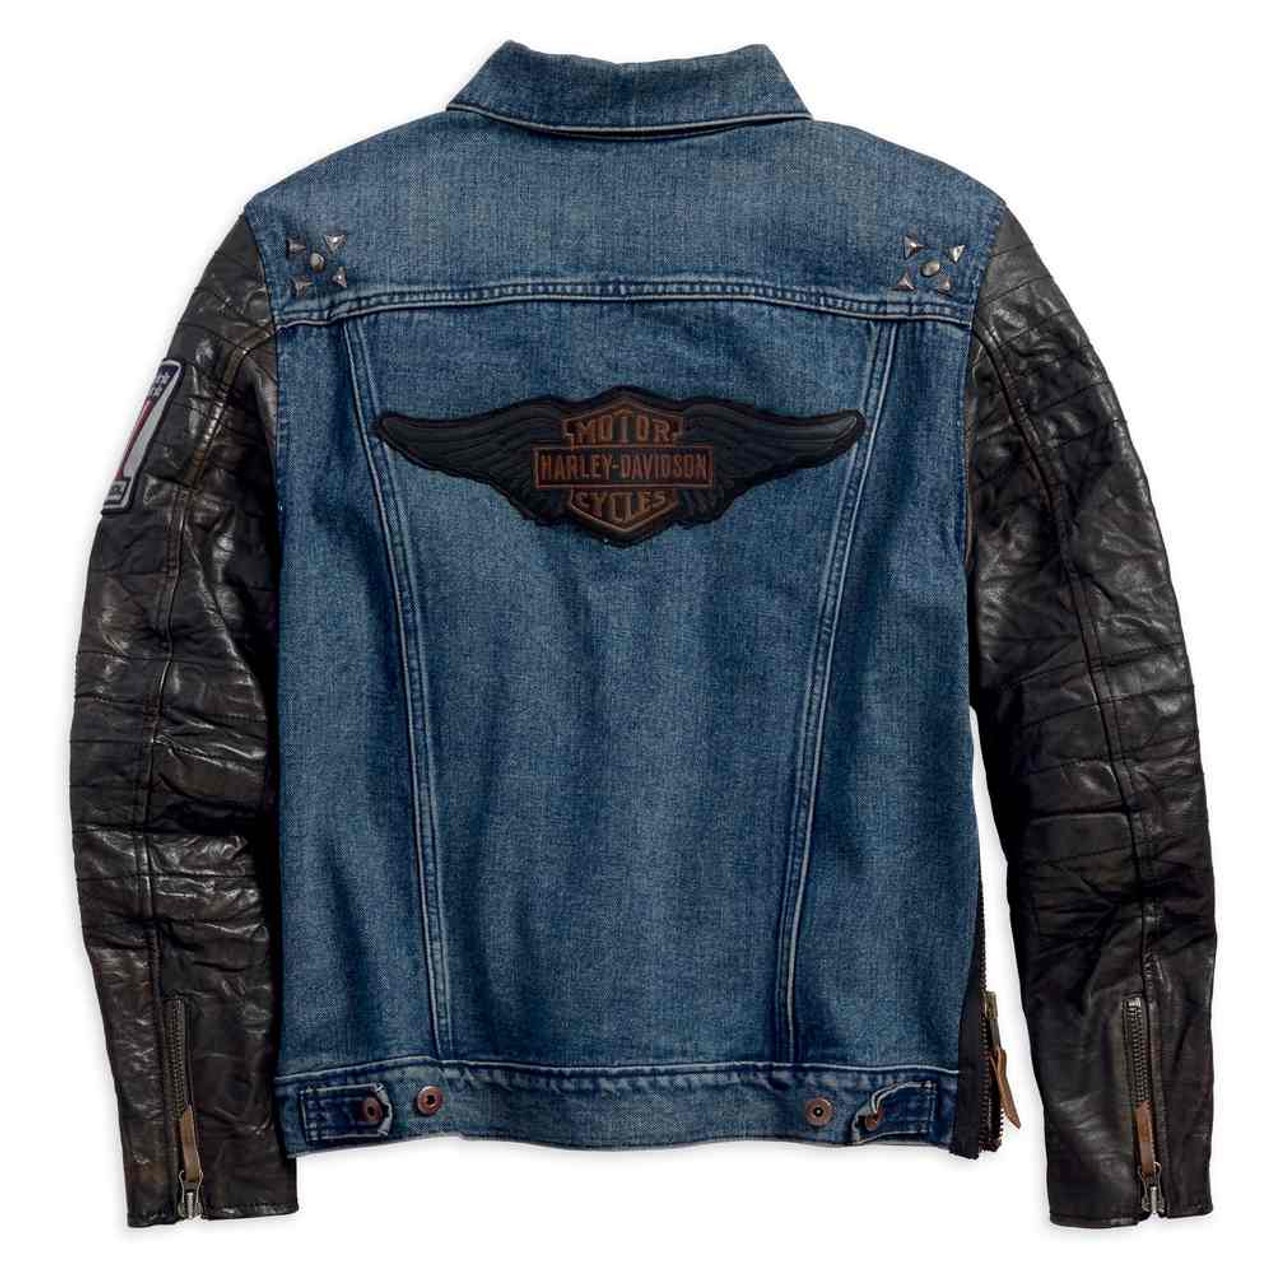 denim jacket with leather sleeves